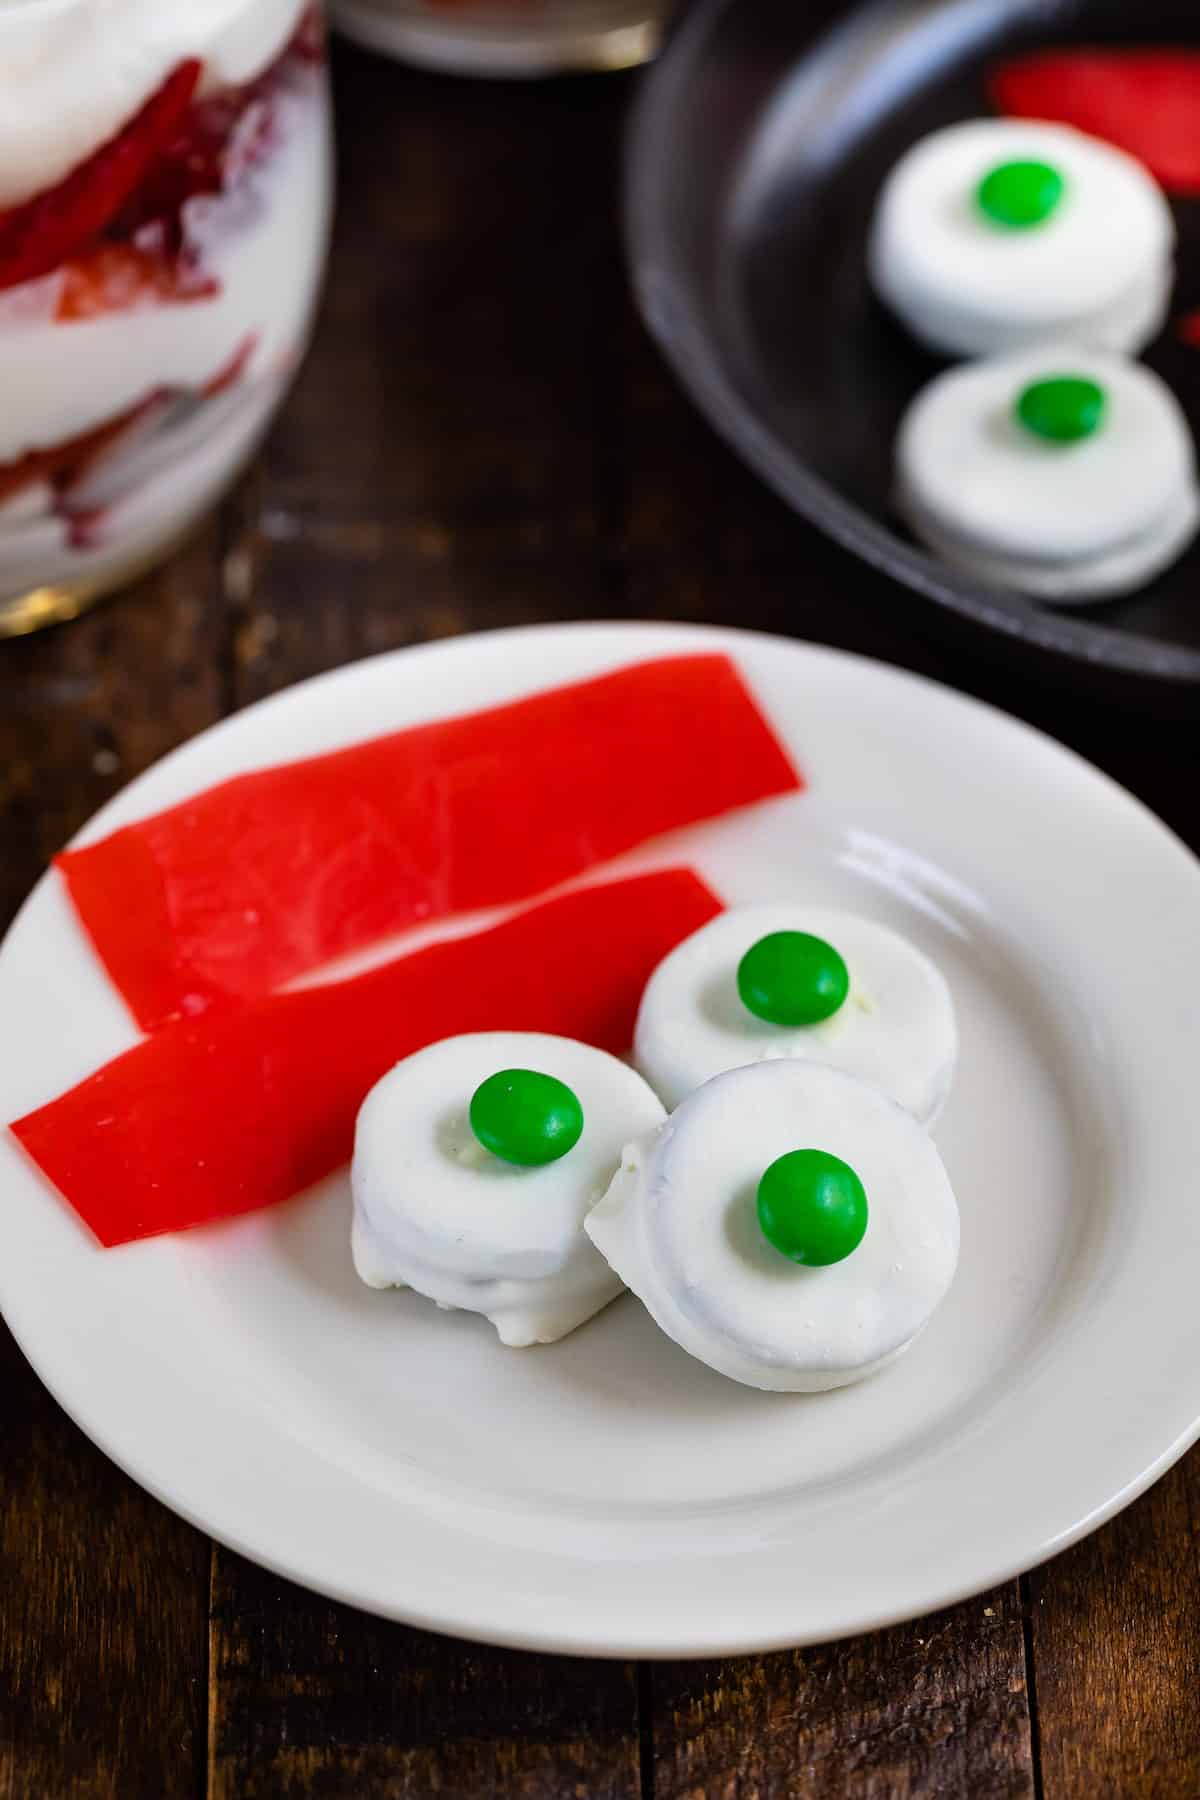 green eggs and ham made from various candies on a white plate.